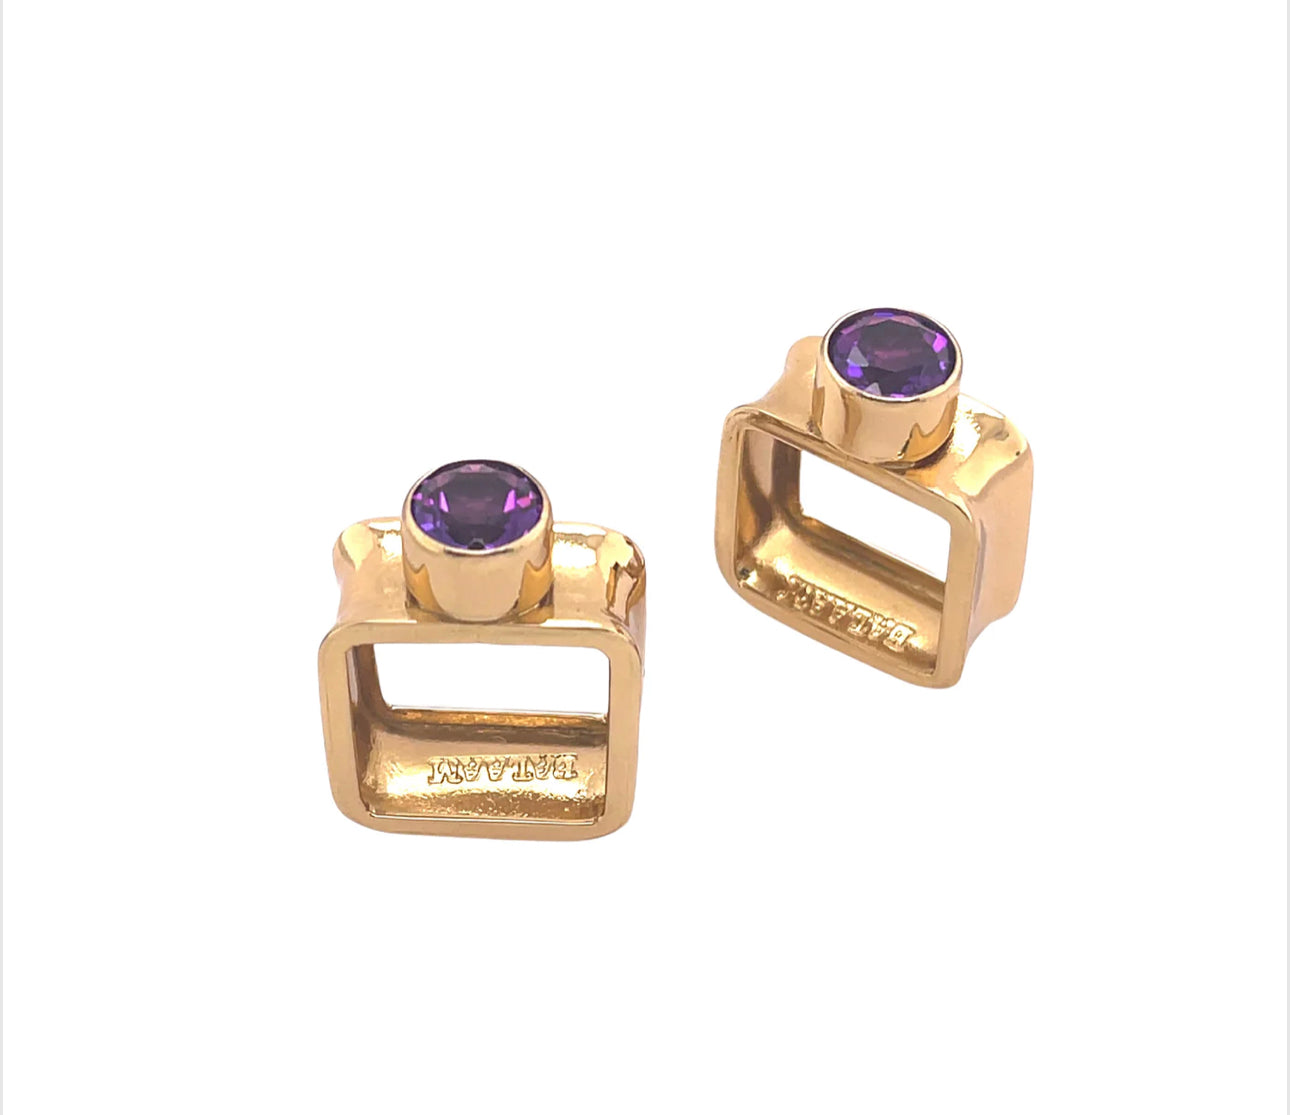 Erika Williner Designs - Square Ring with Amethyst